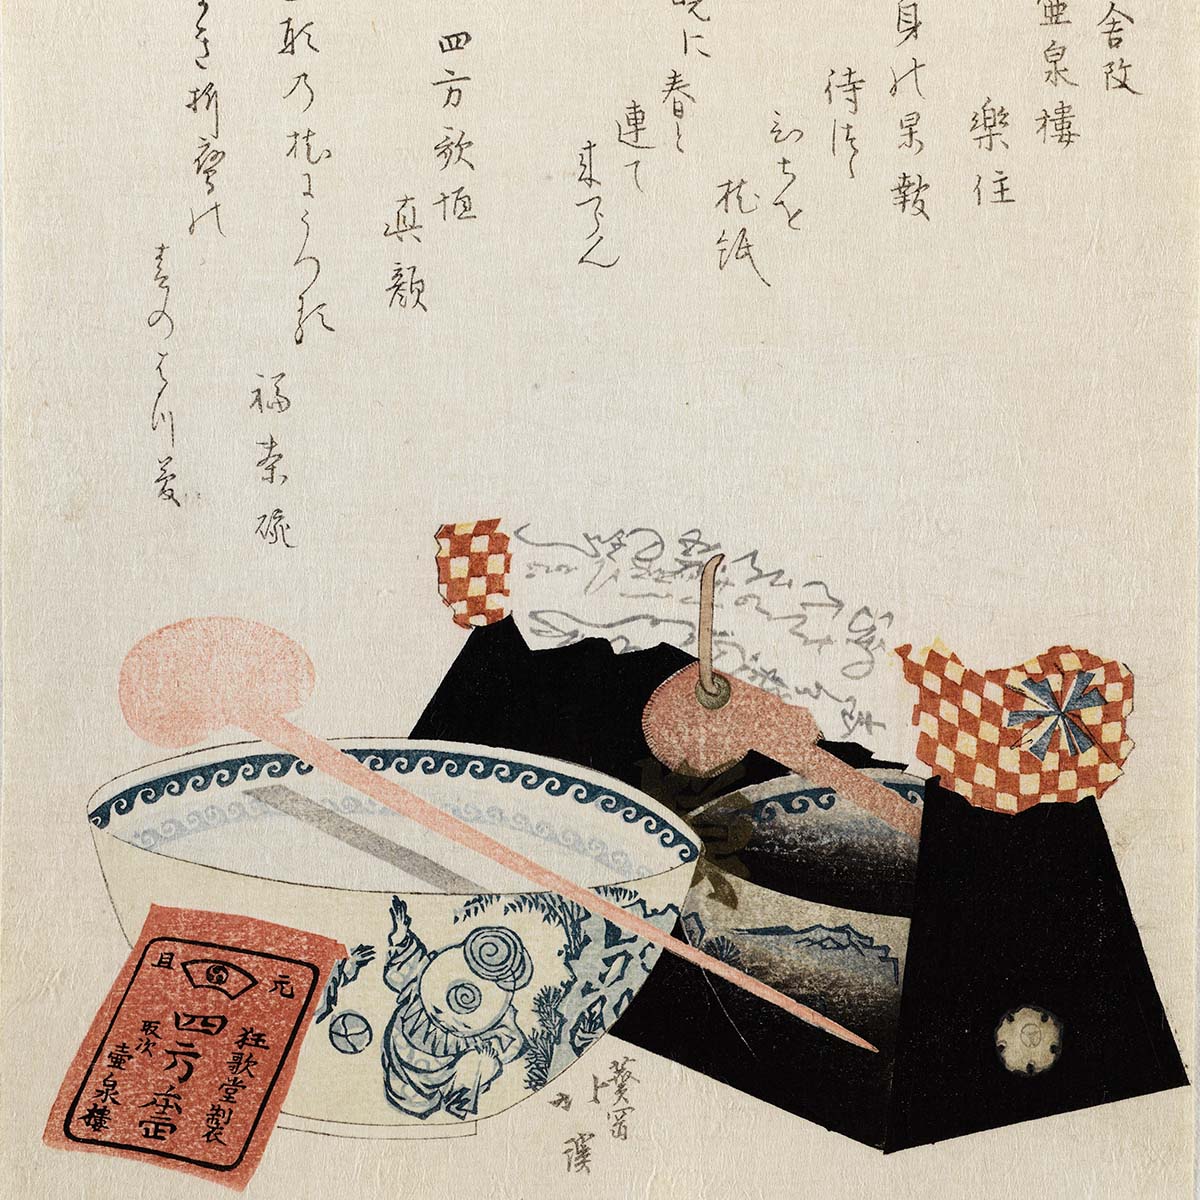 A painting by Totoya Hokkei, called "Surimono: Still Life with a pillow on its lacquer stand and a porcelain bowl"